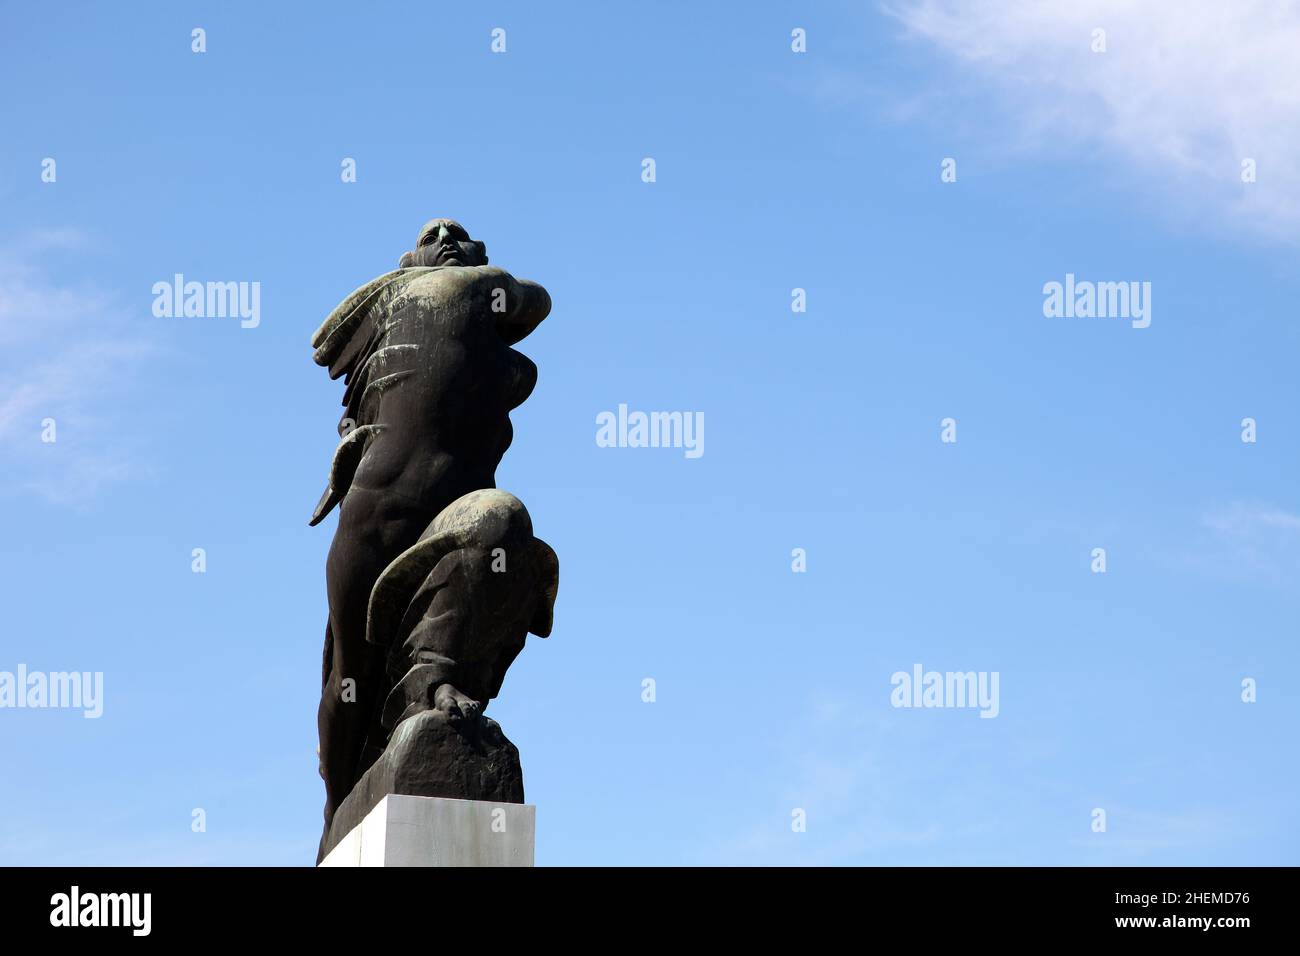 France monument at Kalemegdan Park in Belgrade, Serbia. Belgrade is largest cities of Southeastern Europe. Stock Photo